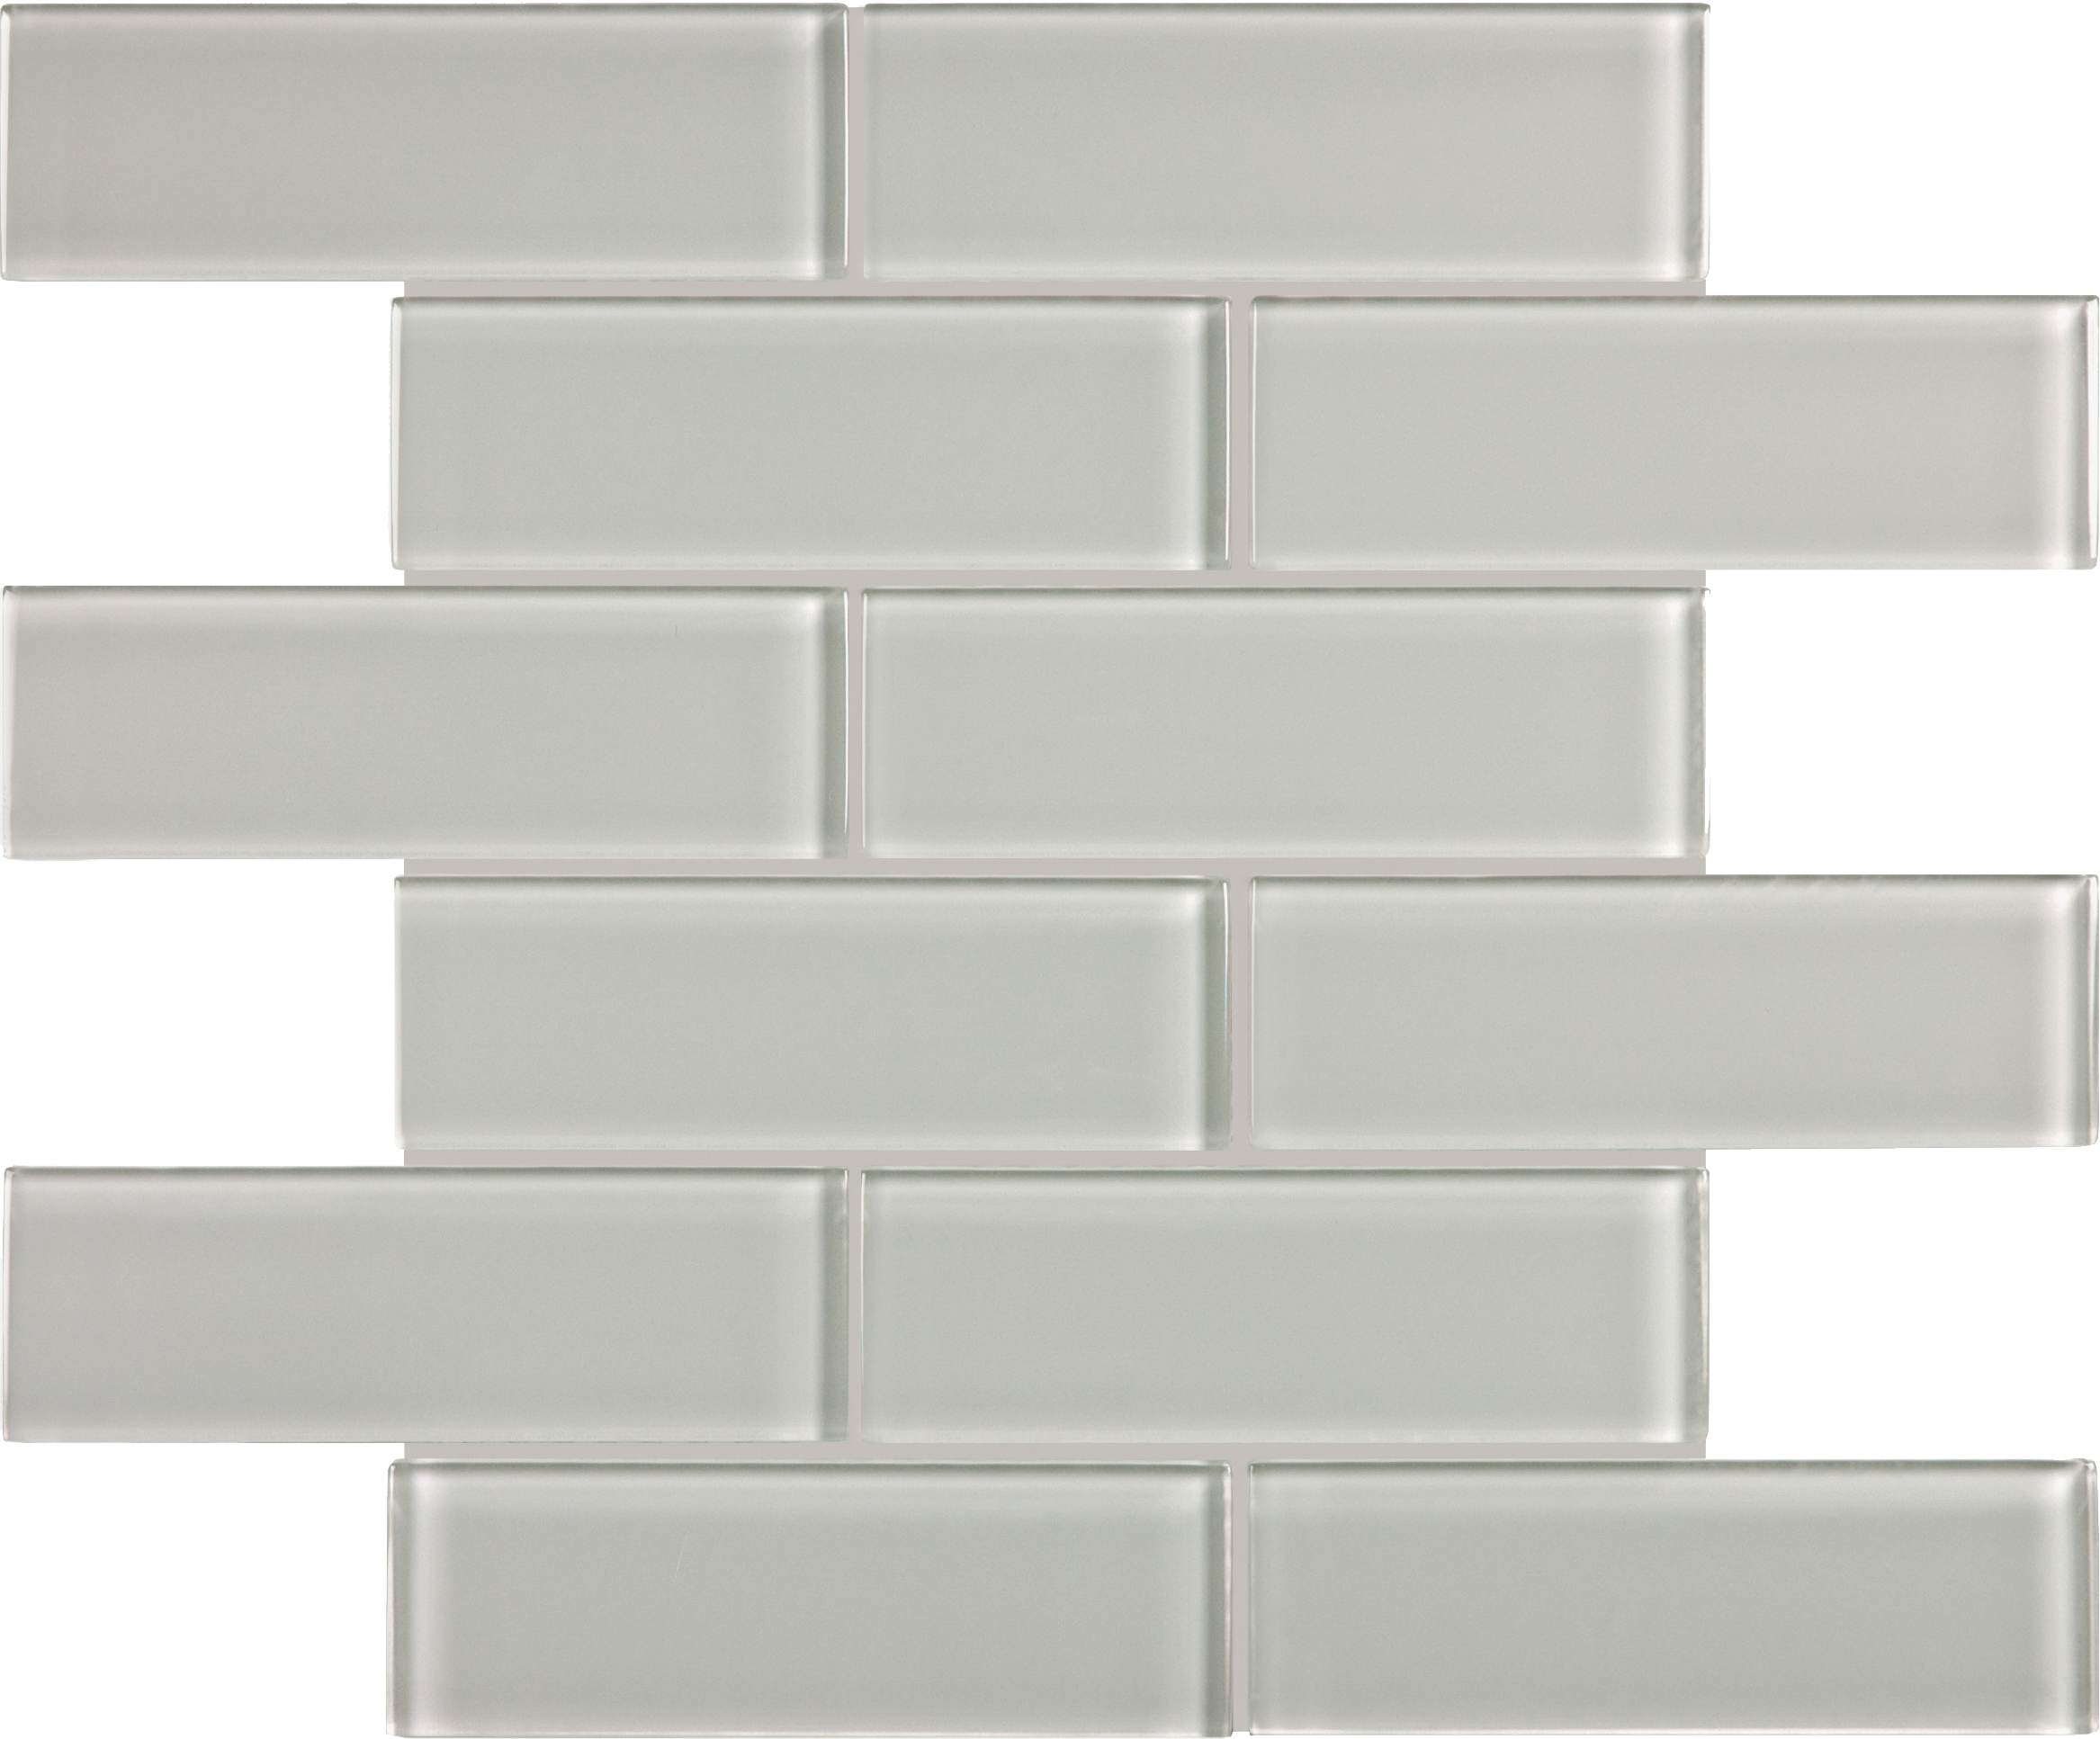 mist brick offset 2x6-inch pattern fused glass mosaic from element anatolia collection distributed by surface group international glossy finish rounded edge mesh shape